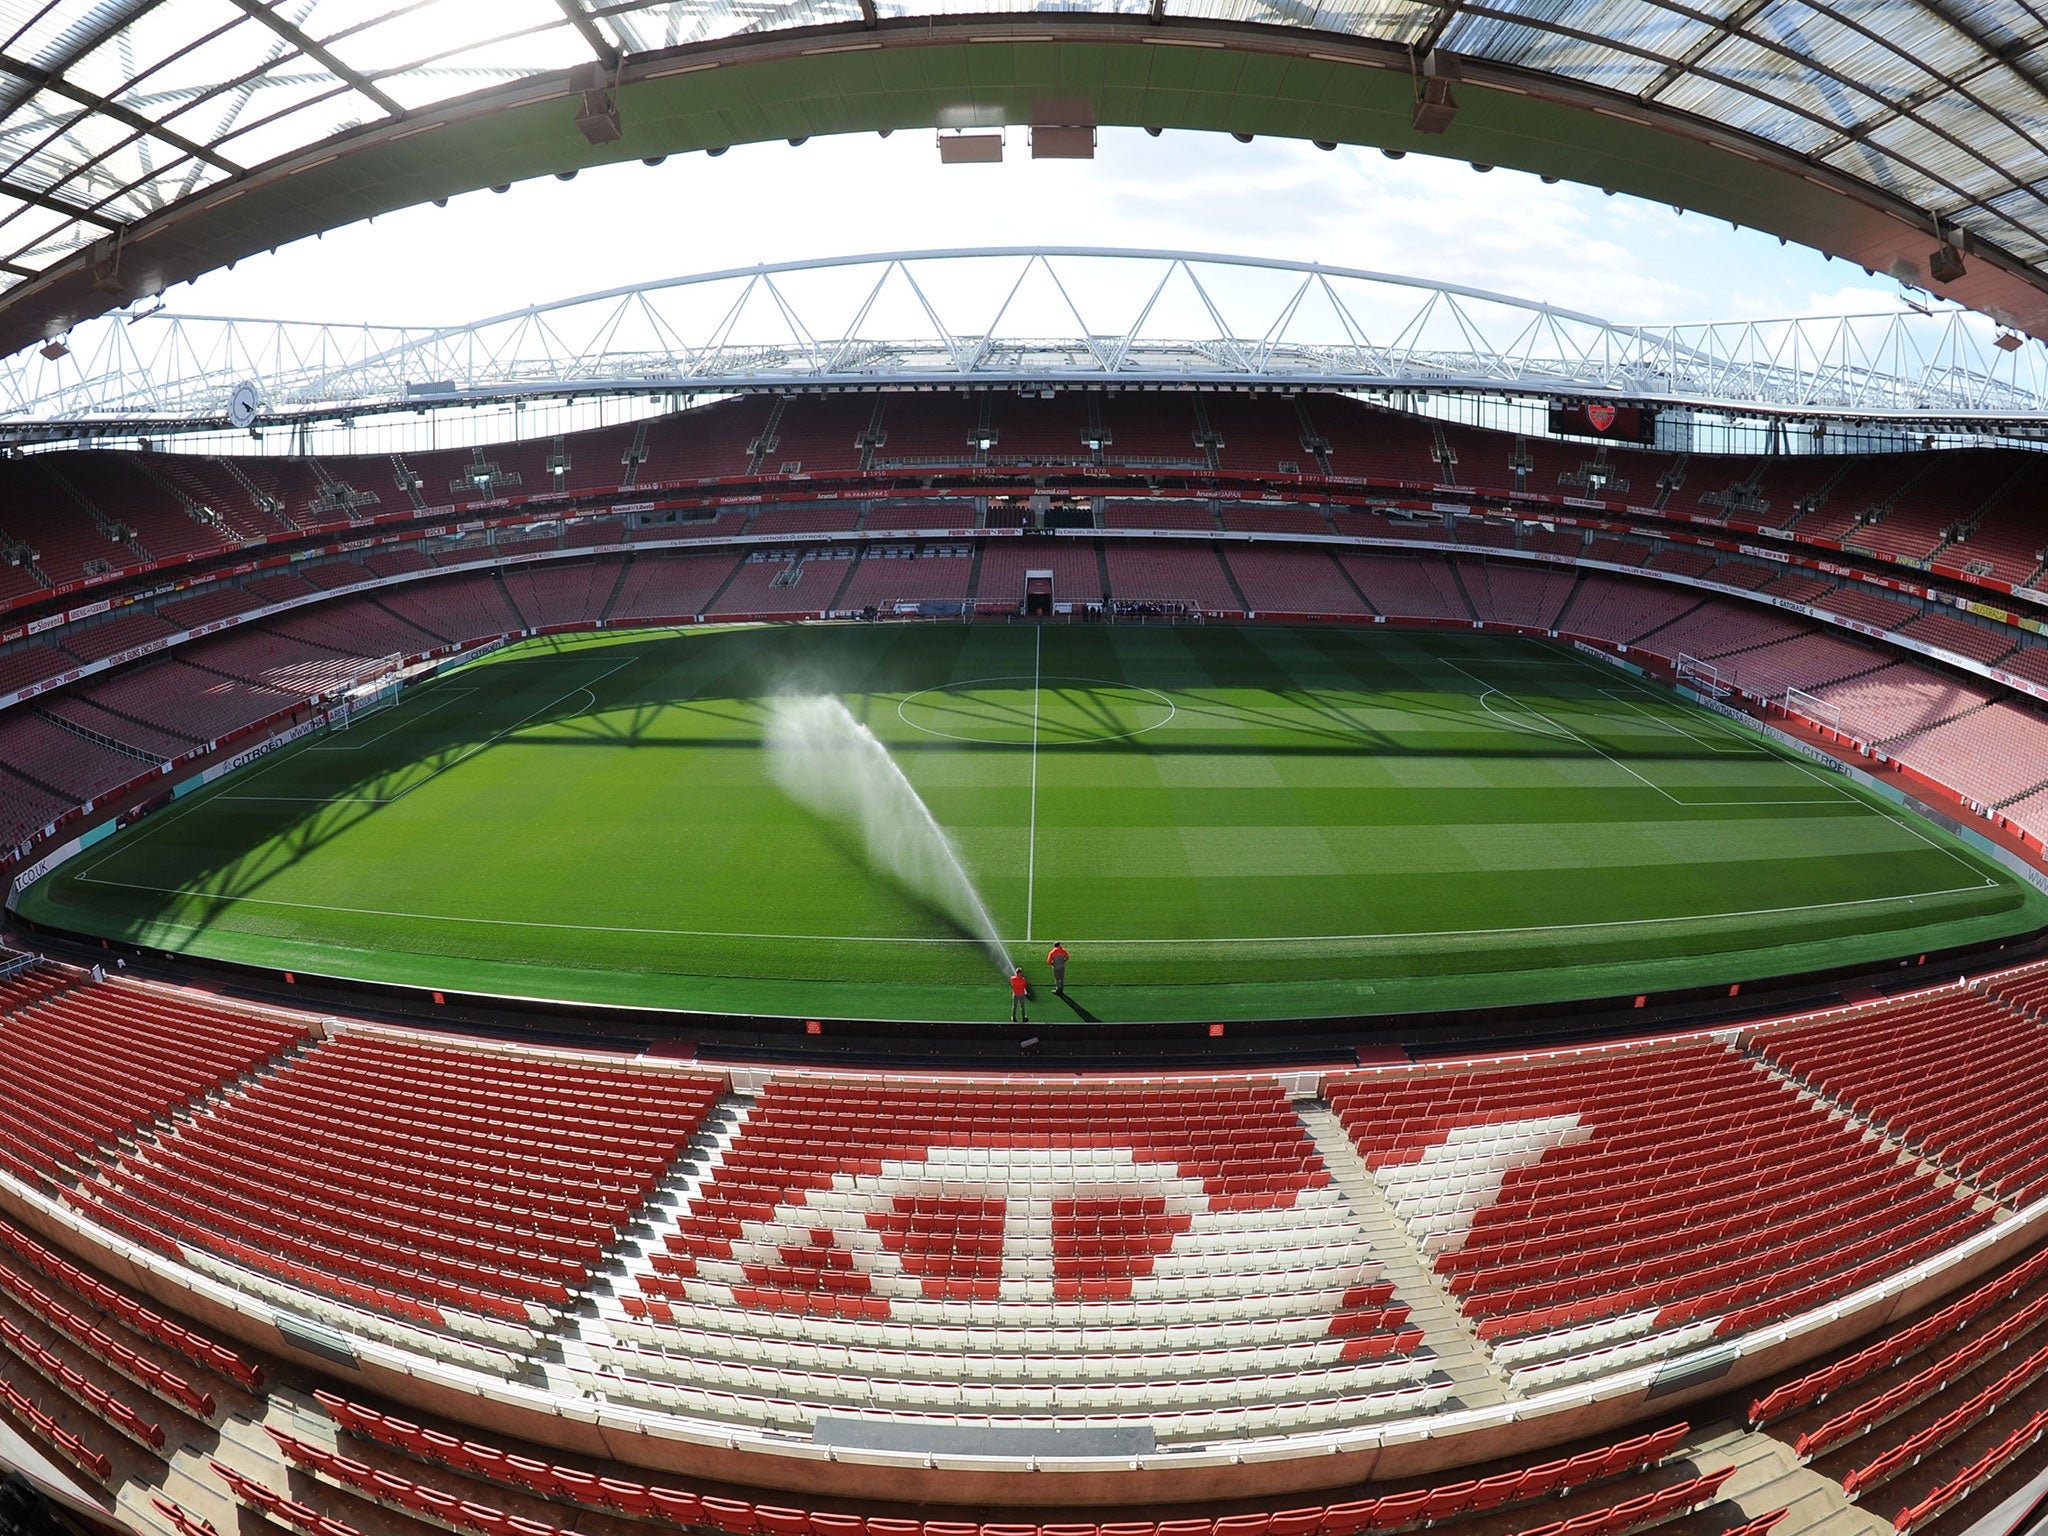 A general view of Emirates Stadium before the Premier League match between Arsenal and West Ham United